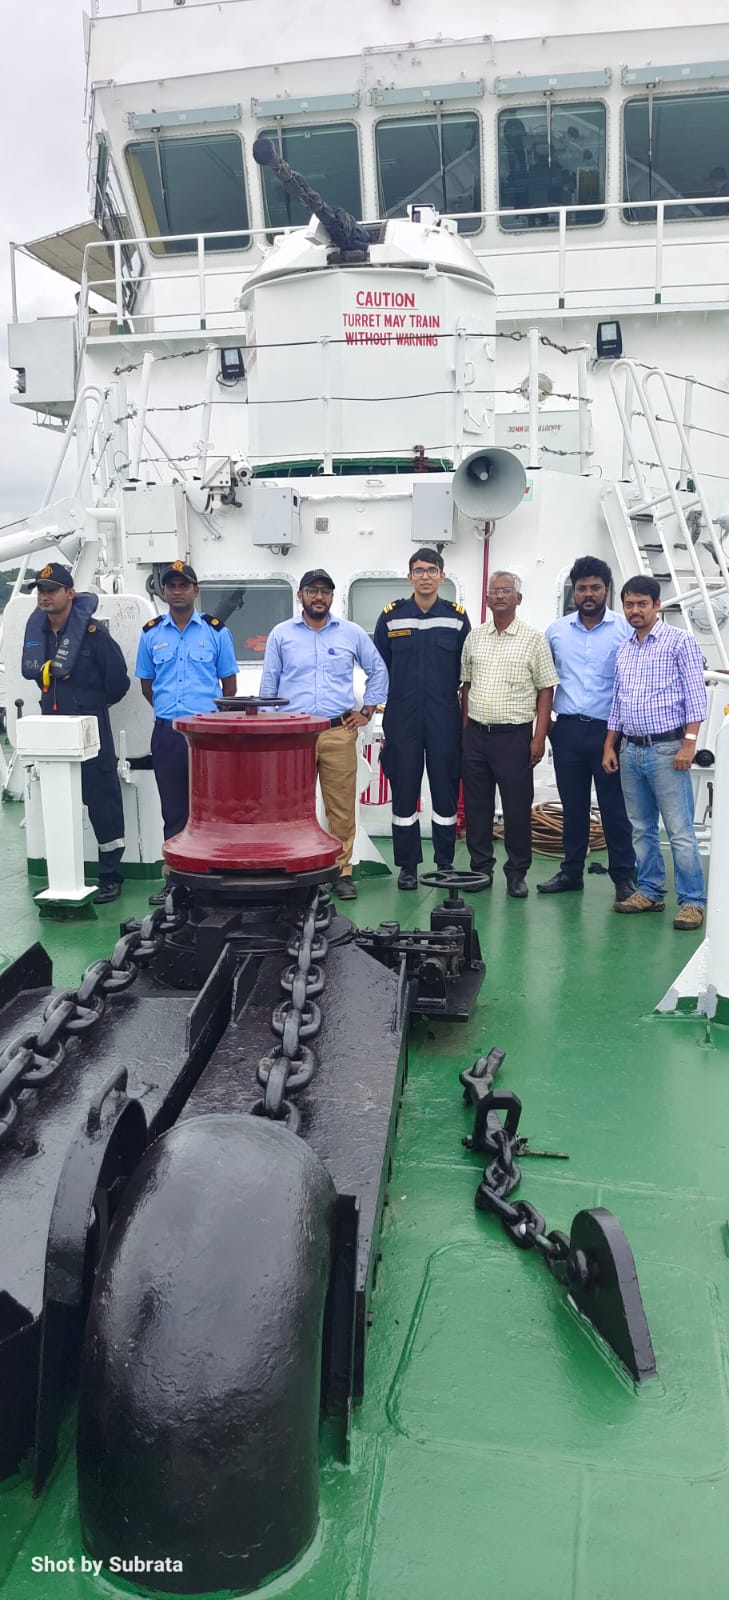 Post Refit River Trials of ICGS Vijaya have been completed successfully the ship will shortly join the fleet for maritime protection of Eastern Seaboard on 27 Jun 23